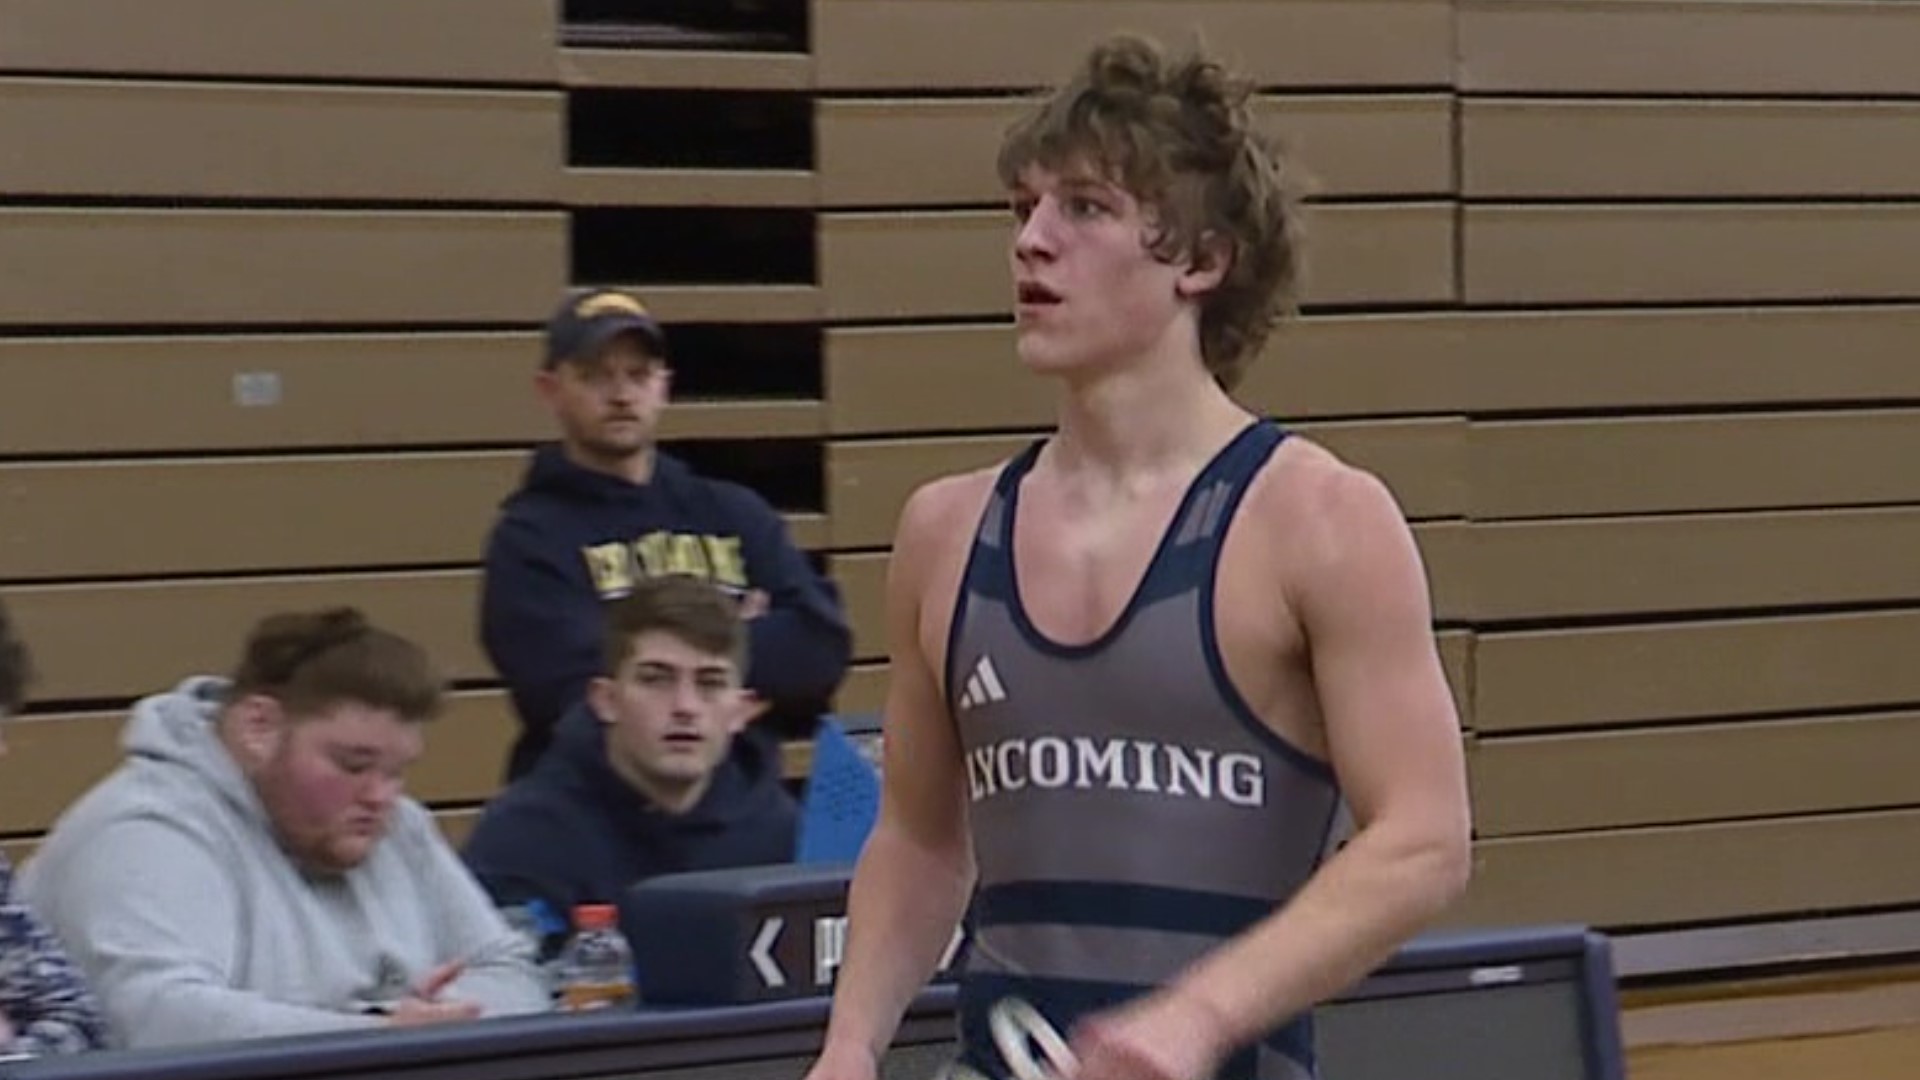 A wrestler at Lycoming College has found his way back to the mat after suffering from a stroke last year.